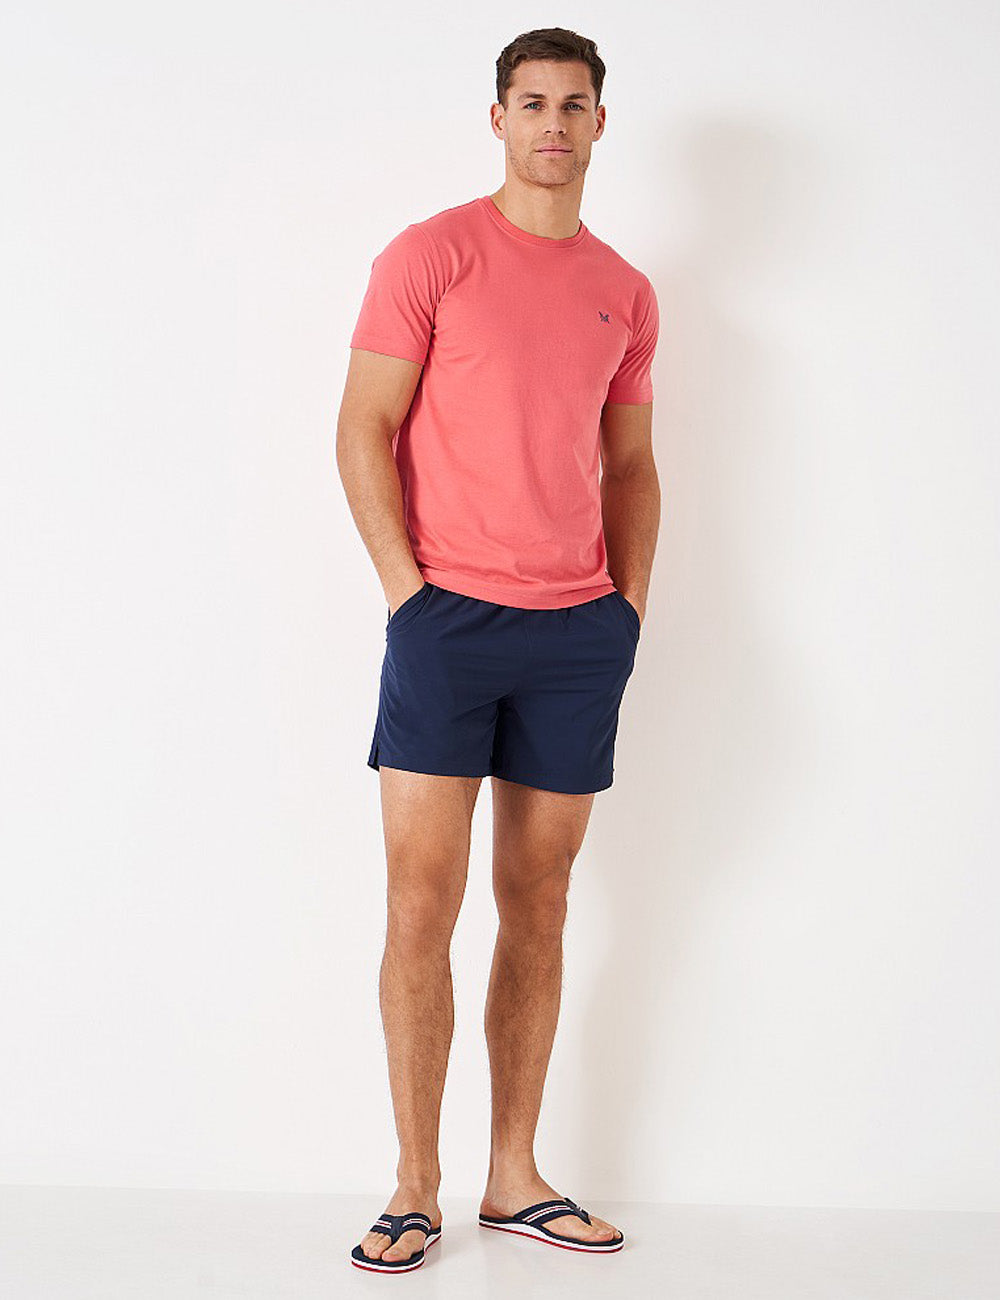 Crew Clothing Classic T-Shirt - Spiced Coral